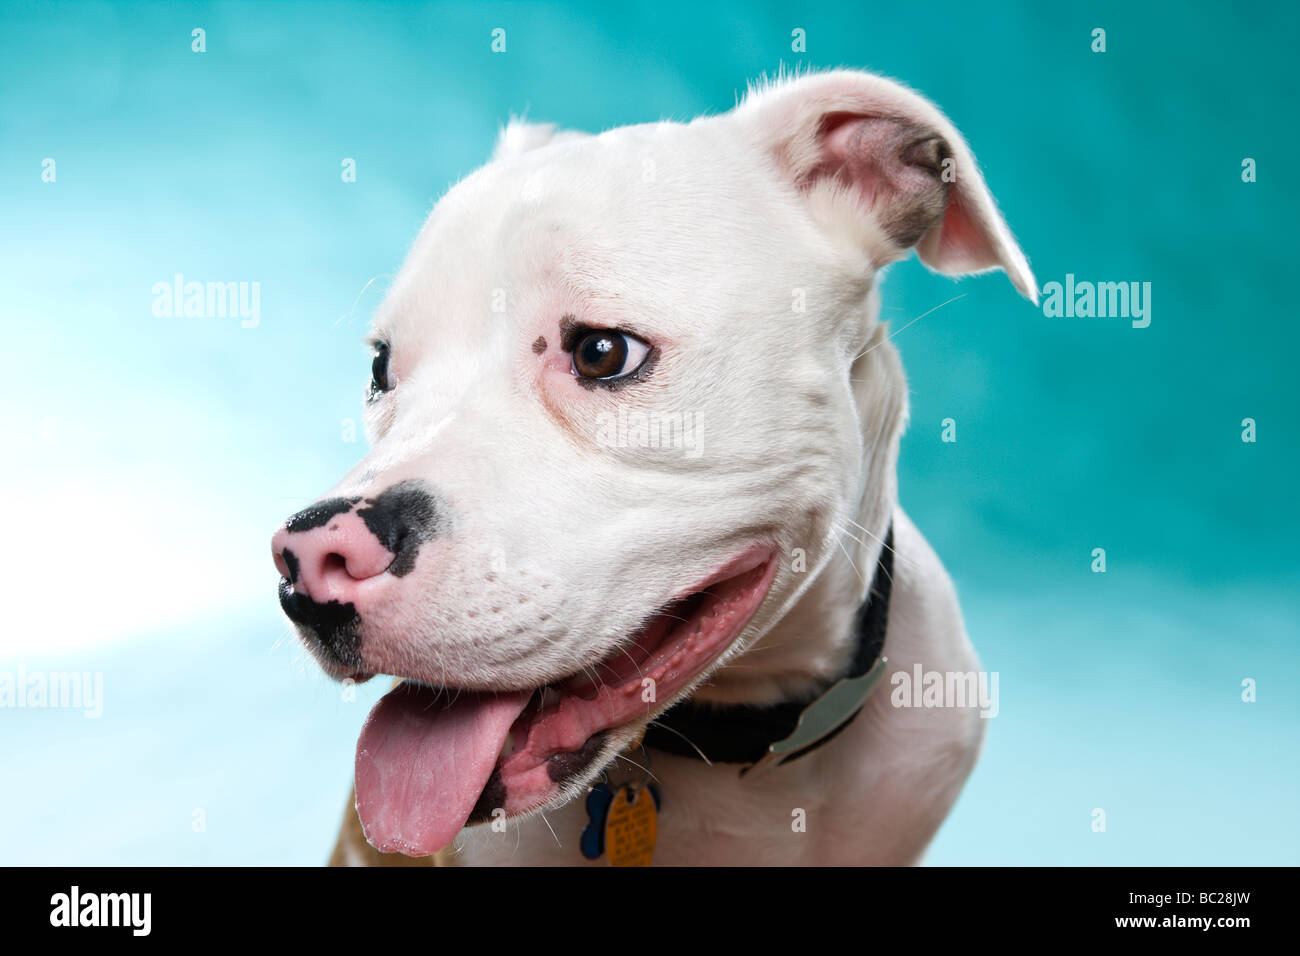 A white Staffordshire Bull Terrier in the studio against a blue green background. Stock Photo